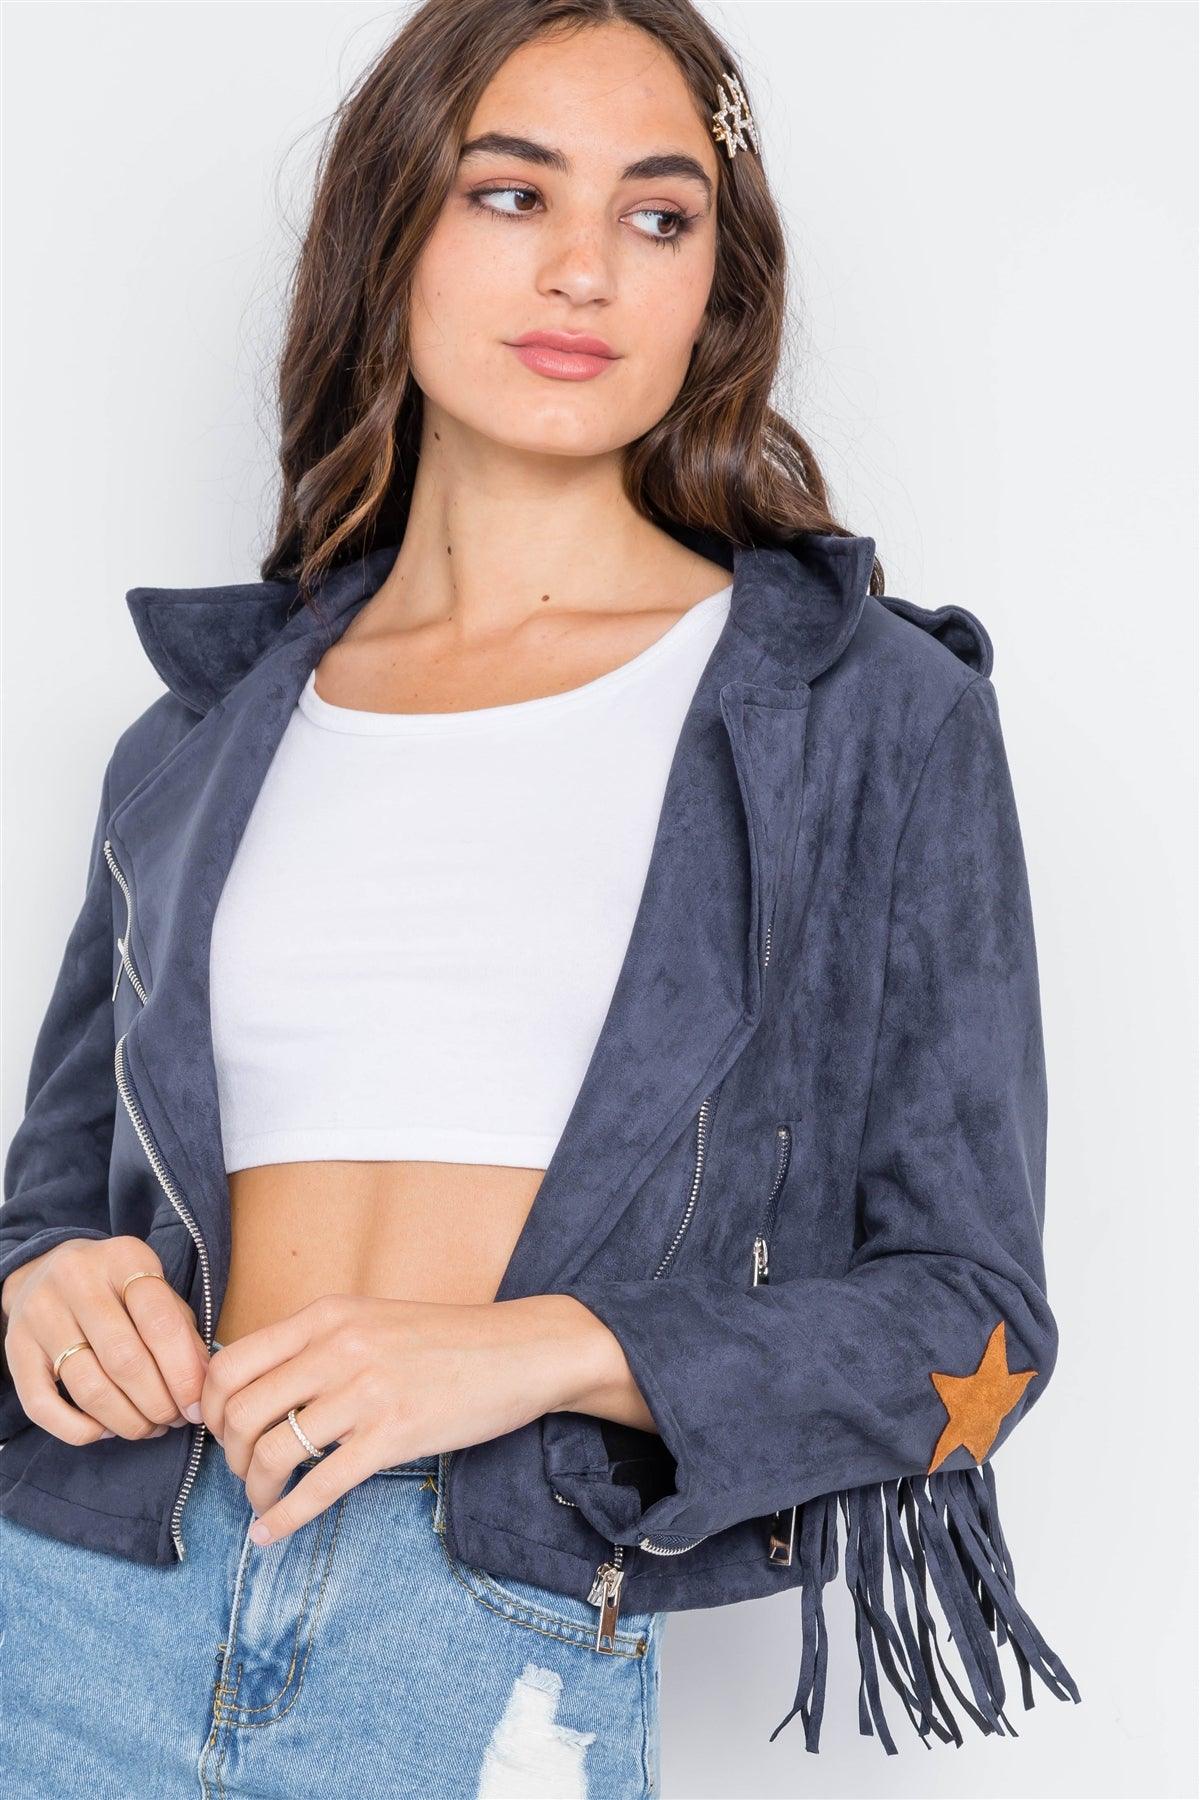 Navy Star Embroidery Faux Suede Moto Jacket